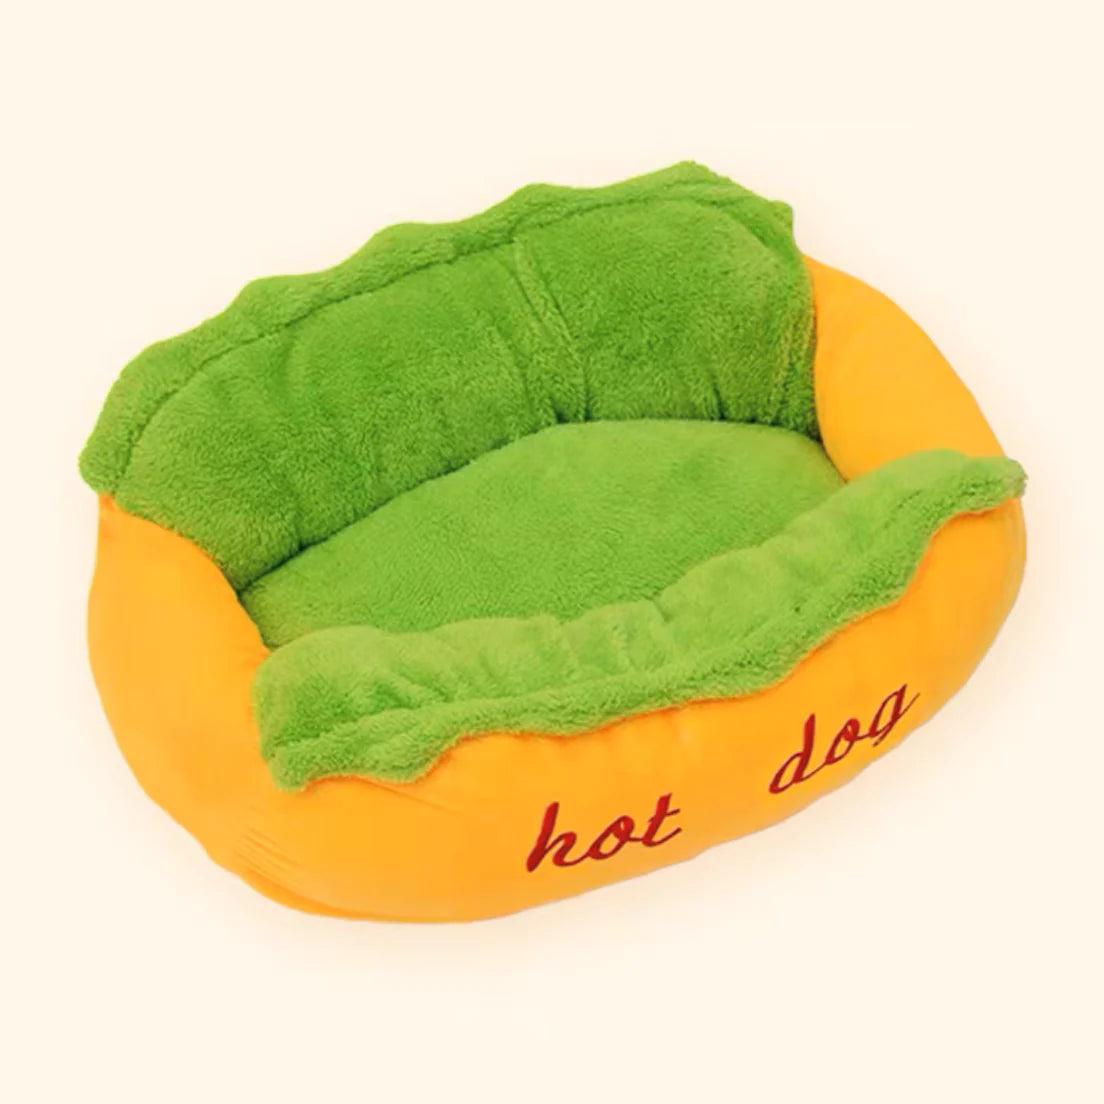 How the Hot Dog Dog Bed Adds Whimsical Comfort to Your Pup's Space